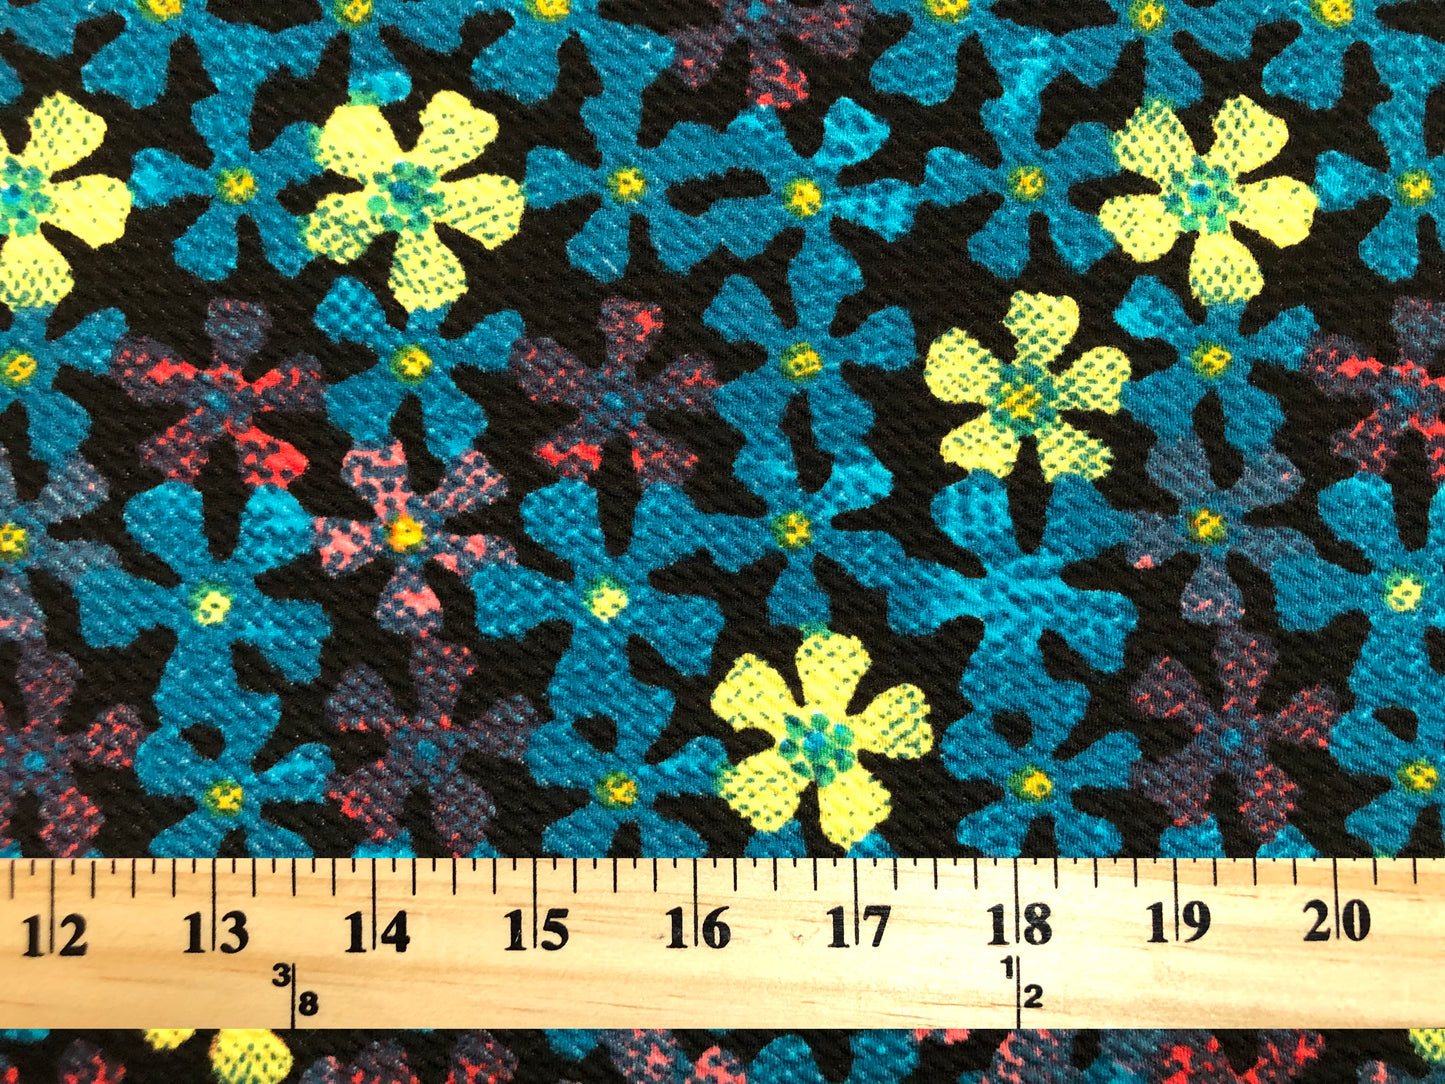 Bullet Knit Printed Fabric-Teal Lime Clover Flowers-BPR244-Sold by the Yard